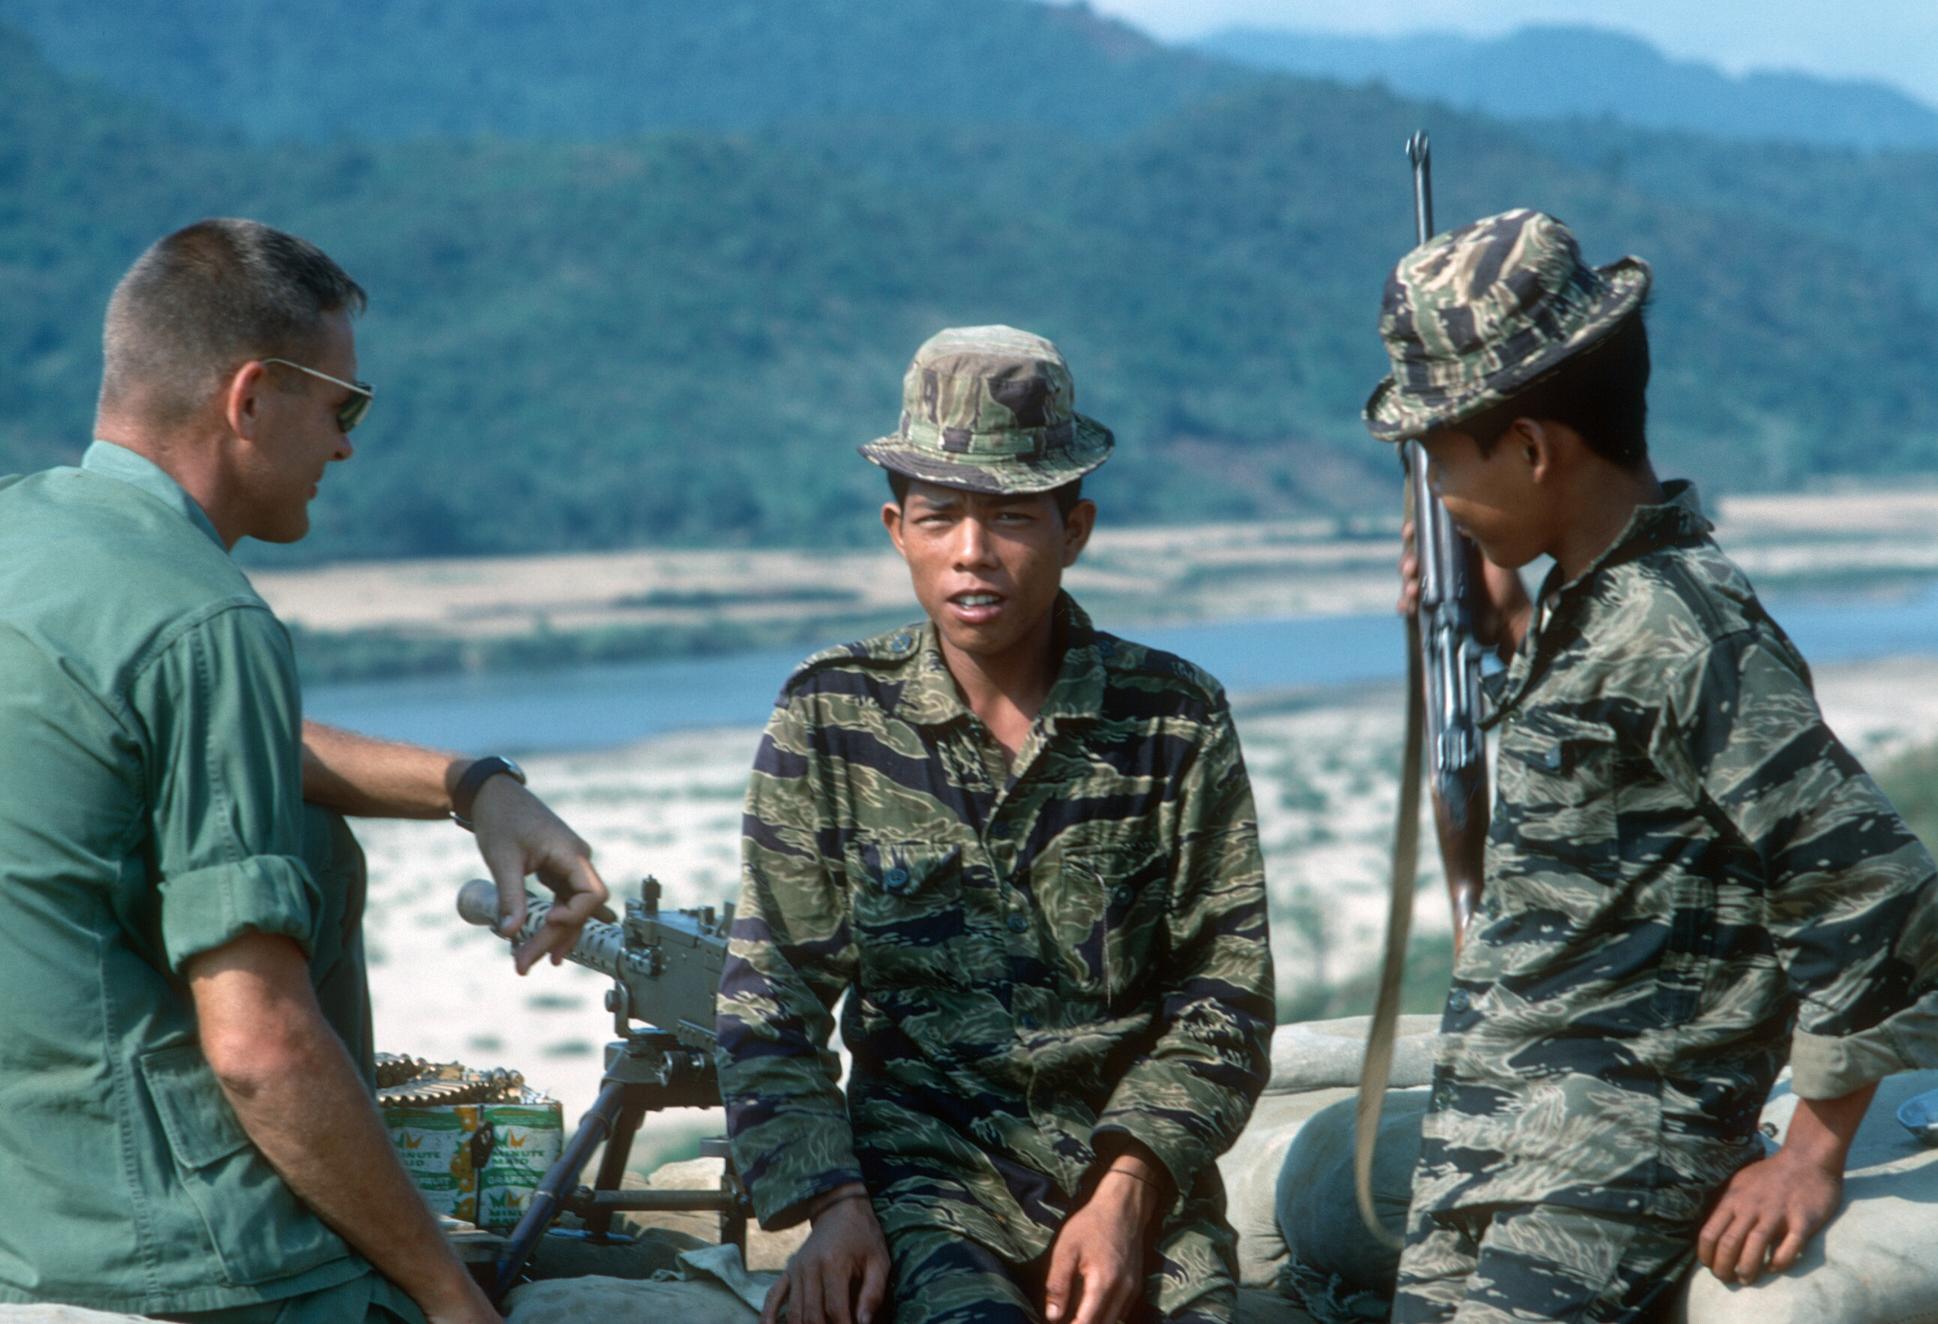 Photos - ARVN Images | Page 4 | A Military Photo & Video Website